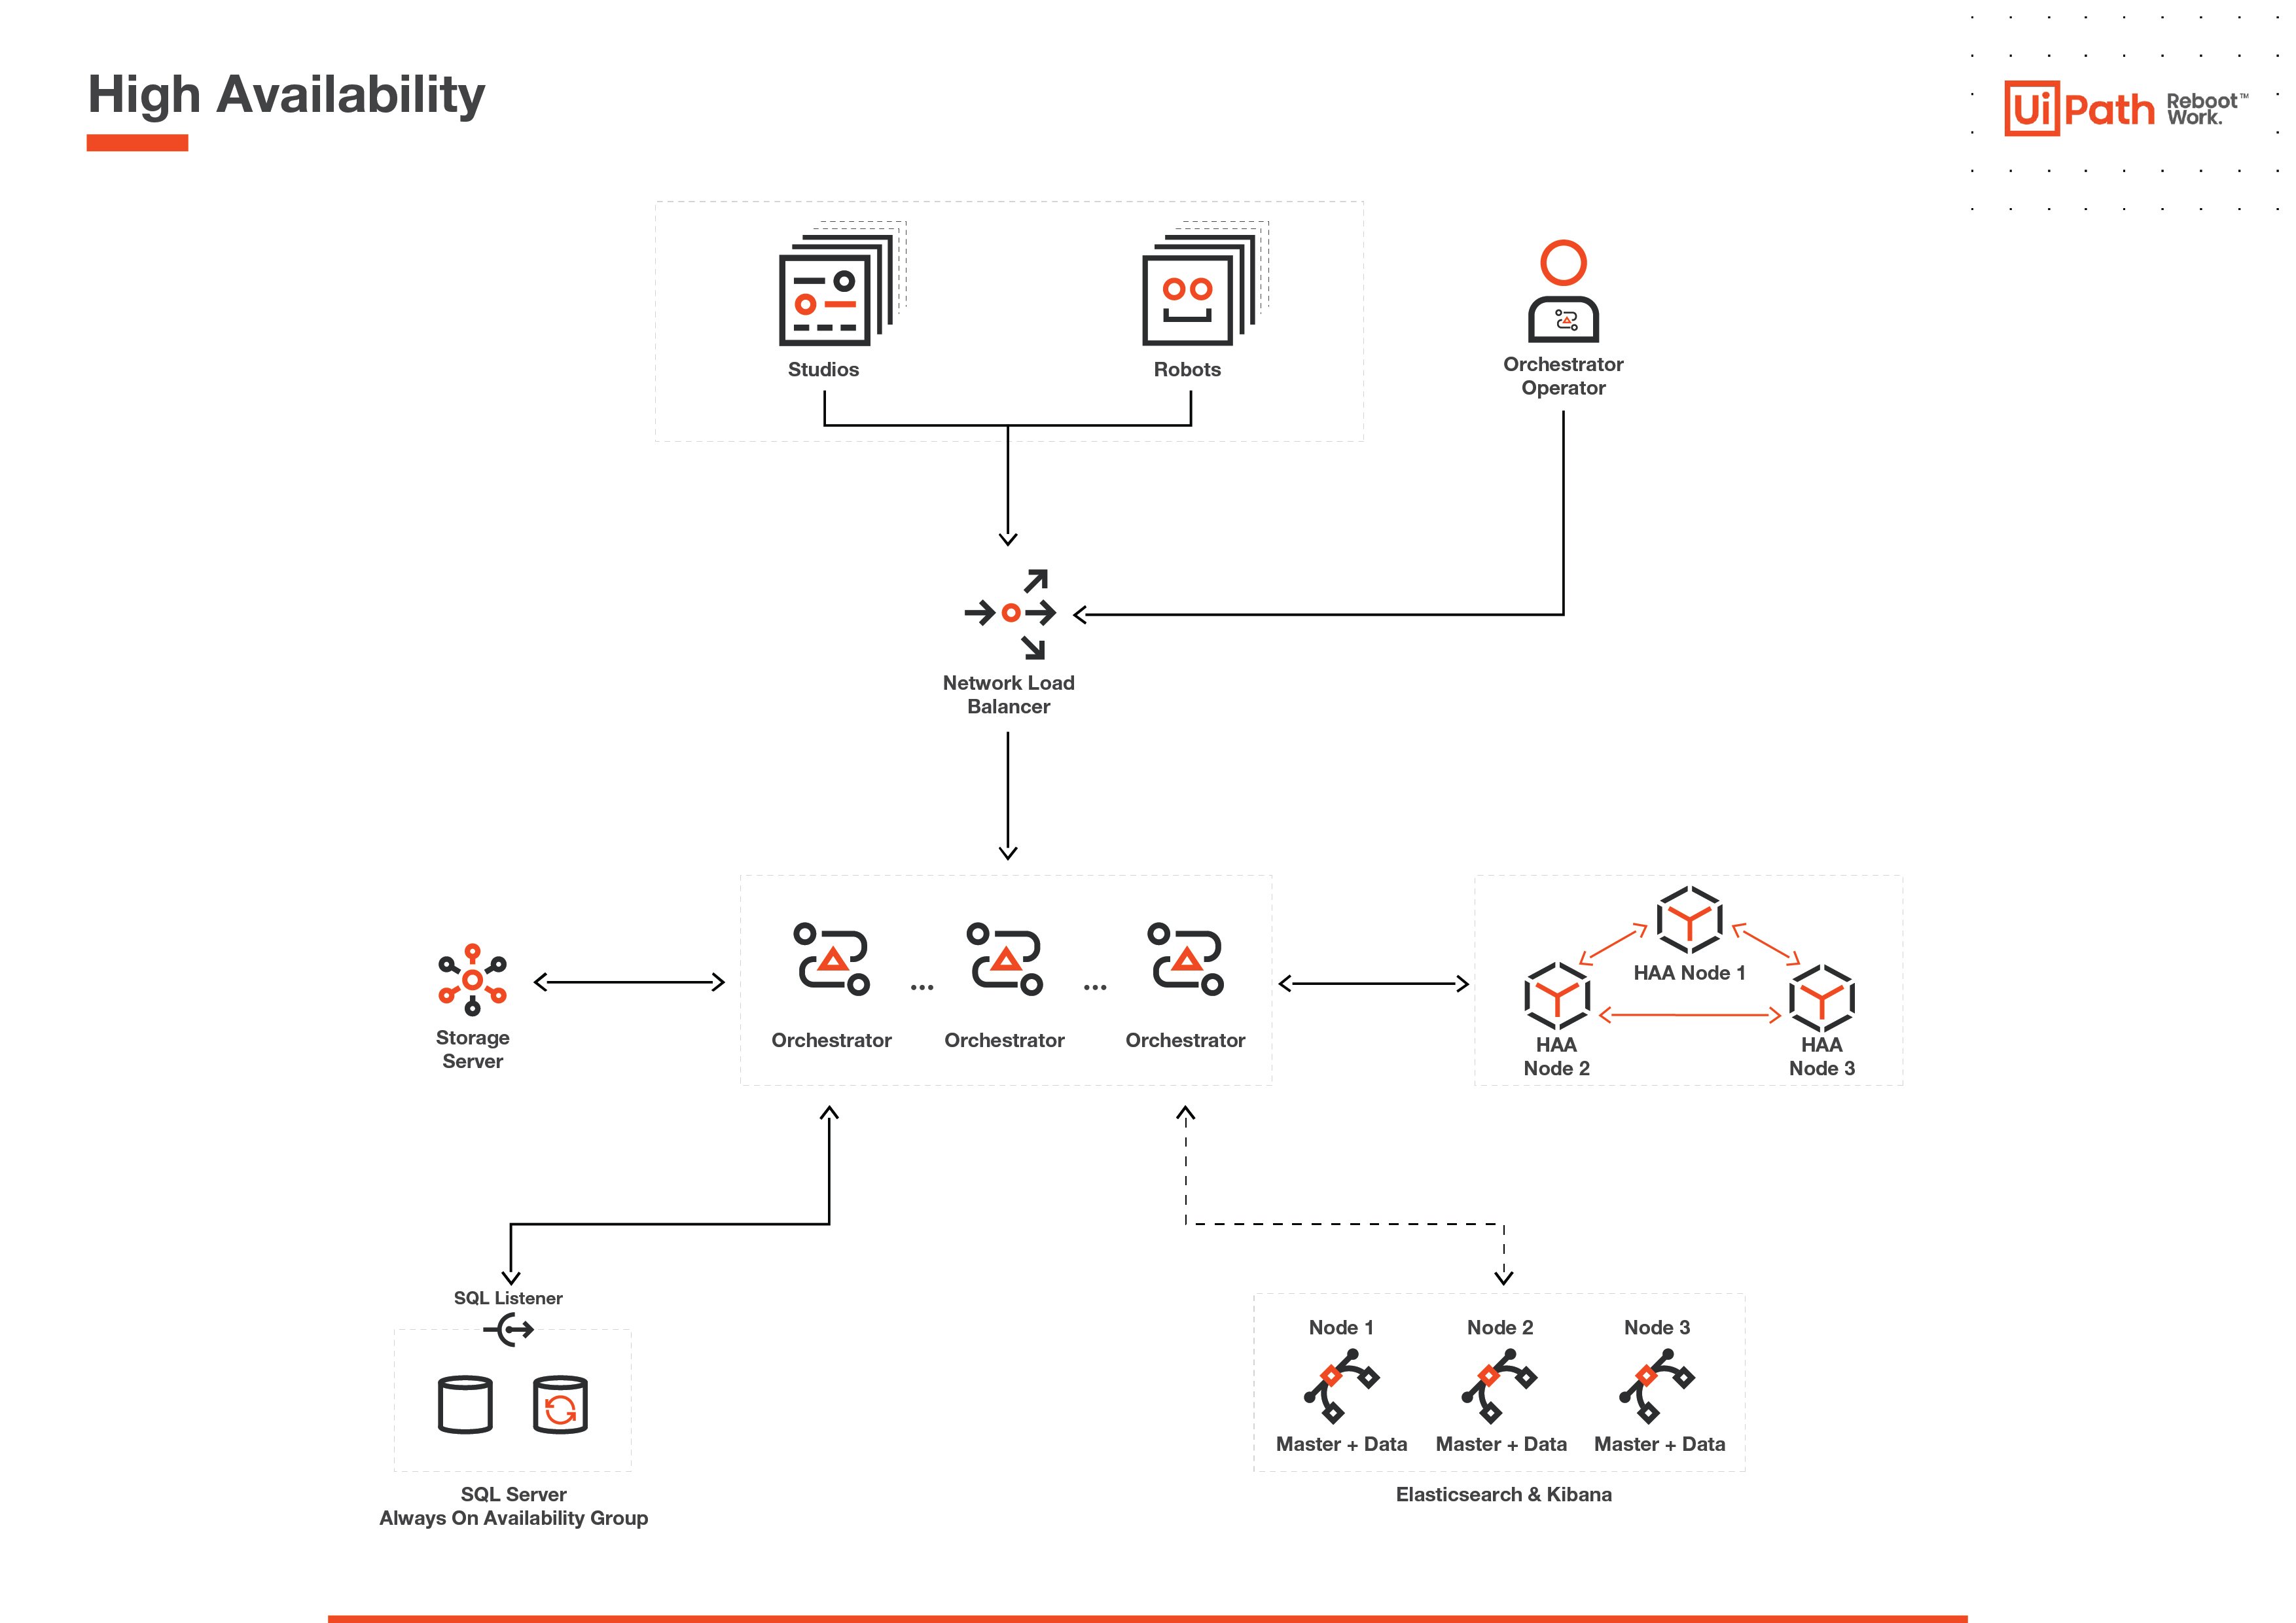 Fig1-UiPath-High-Availability-Architecture